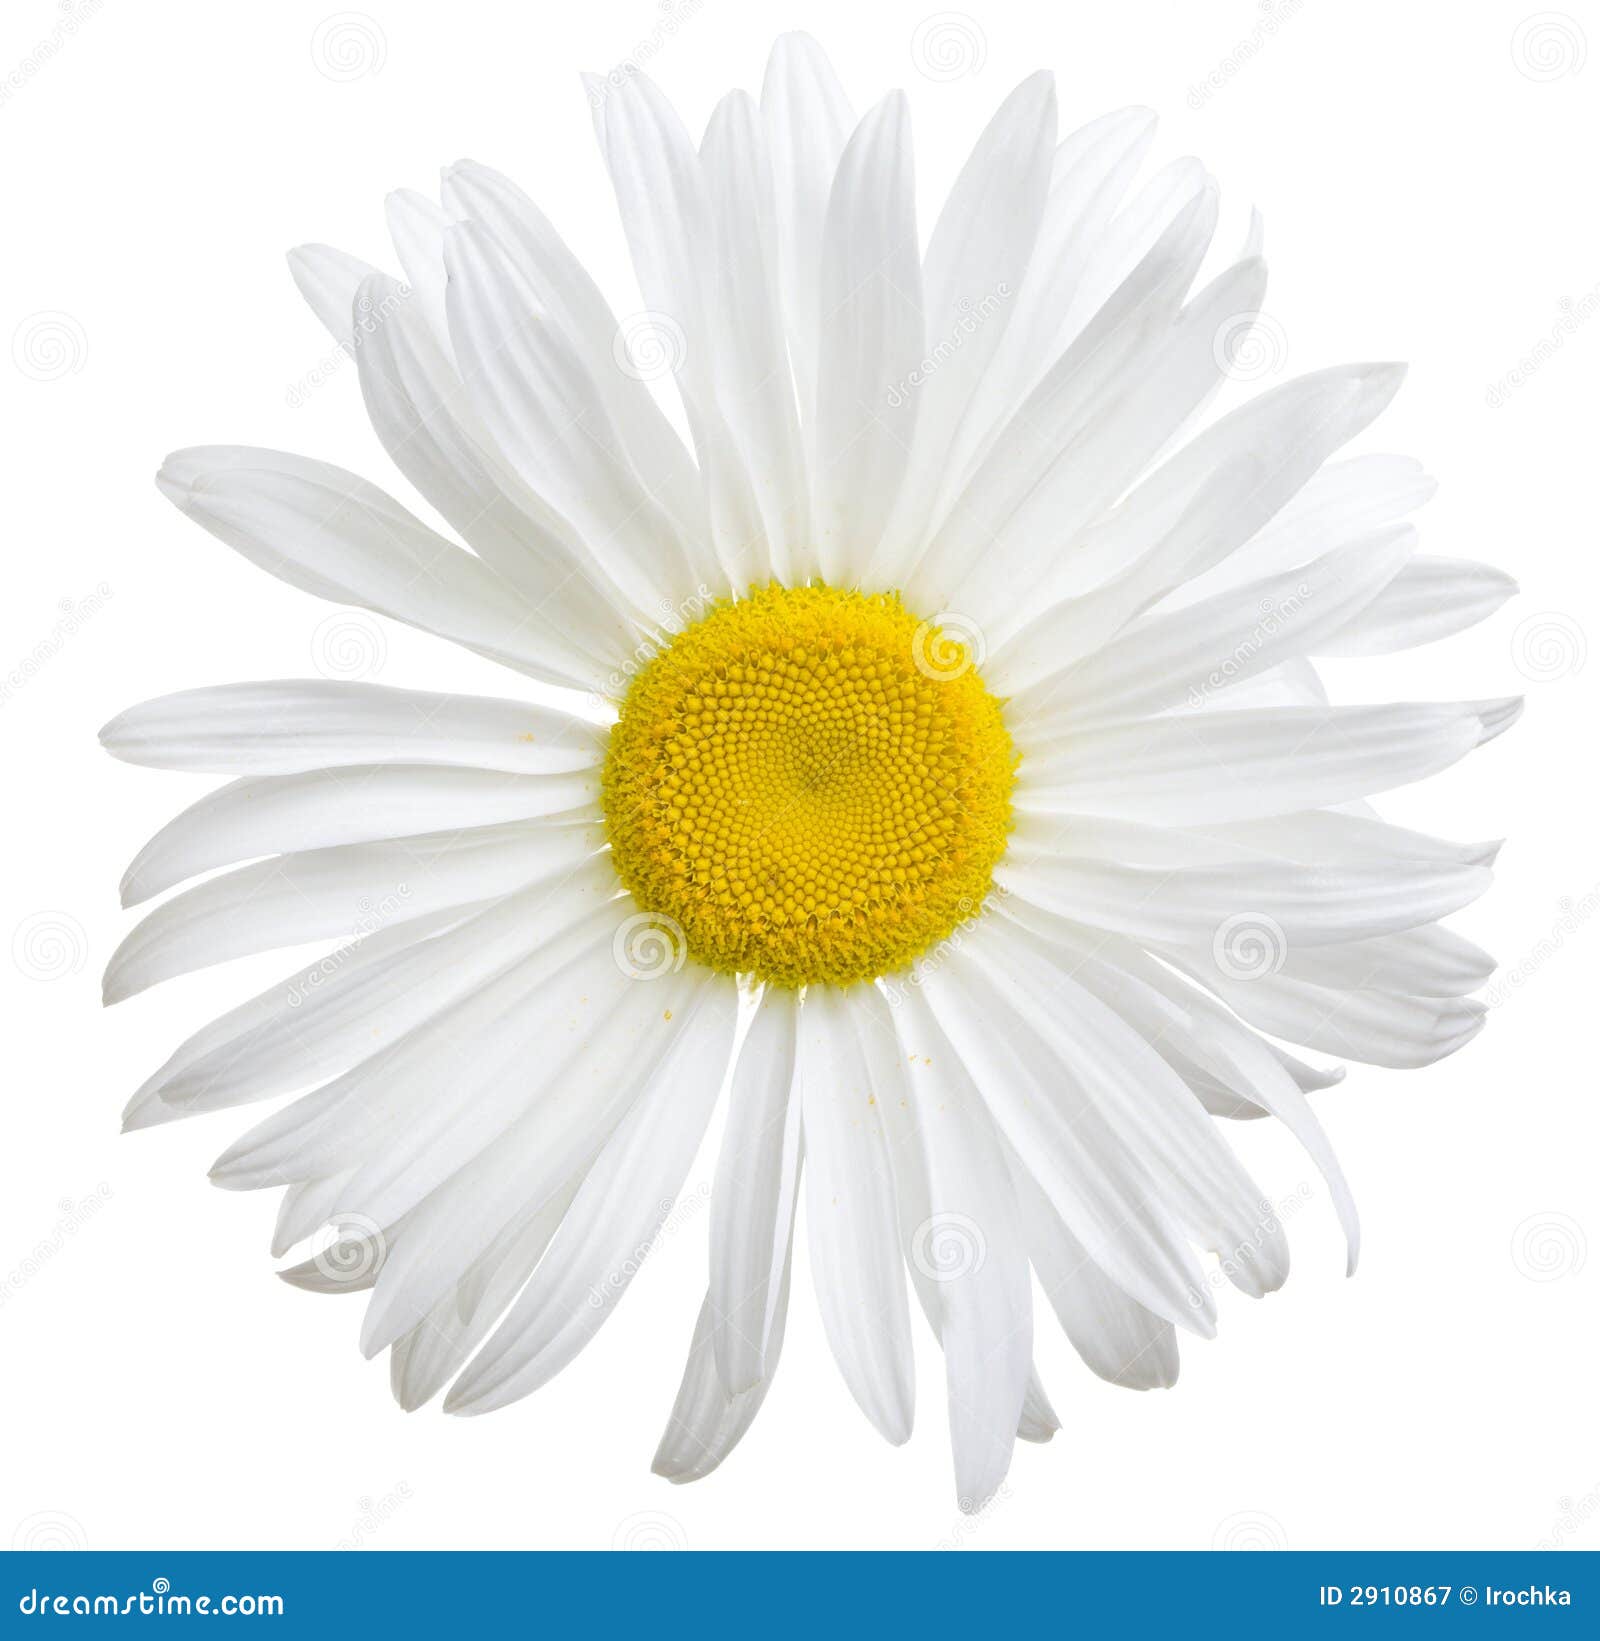 Pictures free daisies Types of